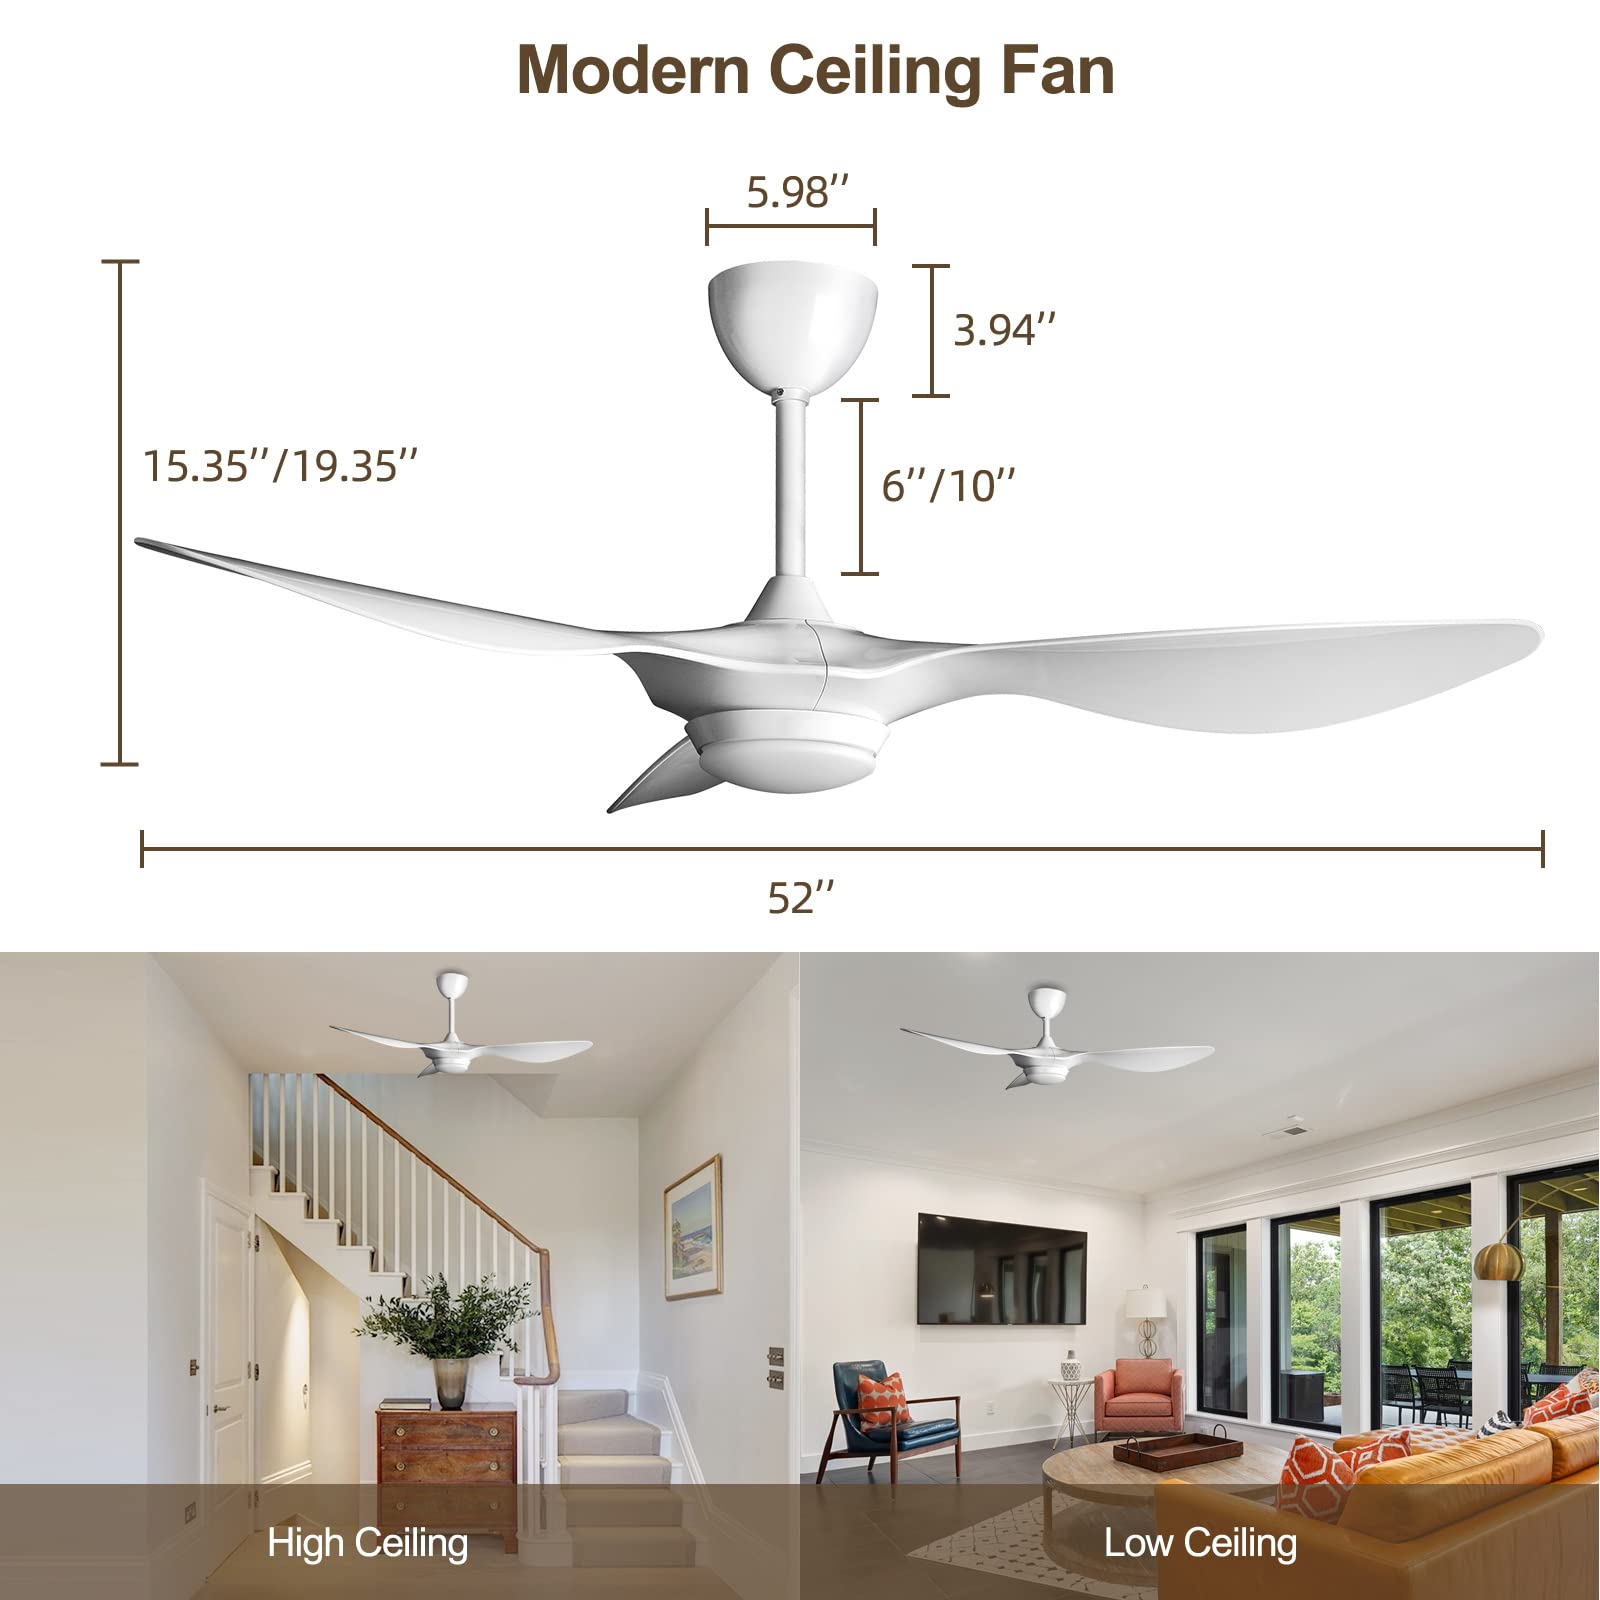 reiga 52-in Modern Bright White Ceiling Fan with Dimmable Light and Remote Control, 3 Blades Ceiling Fans Reversible Quiet DC ETL Motor, 6-Speed, Timer, for Bedroom Living Room and Patio